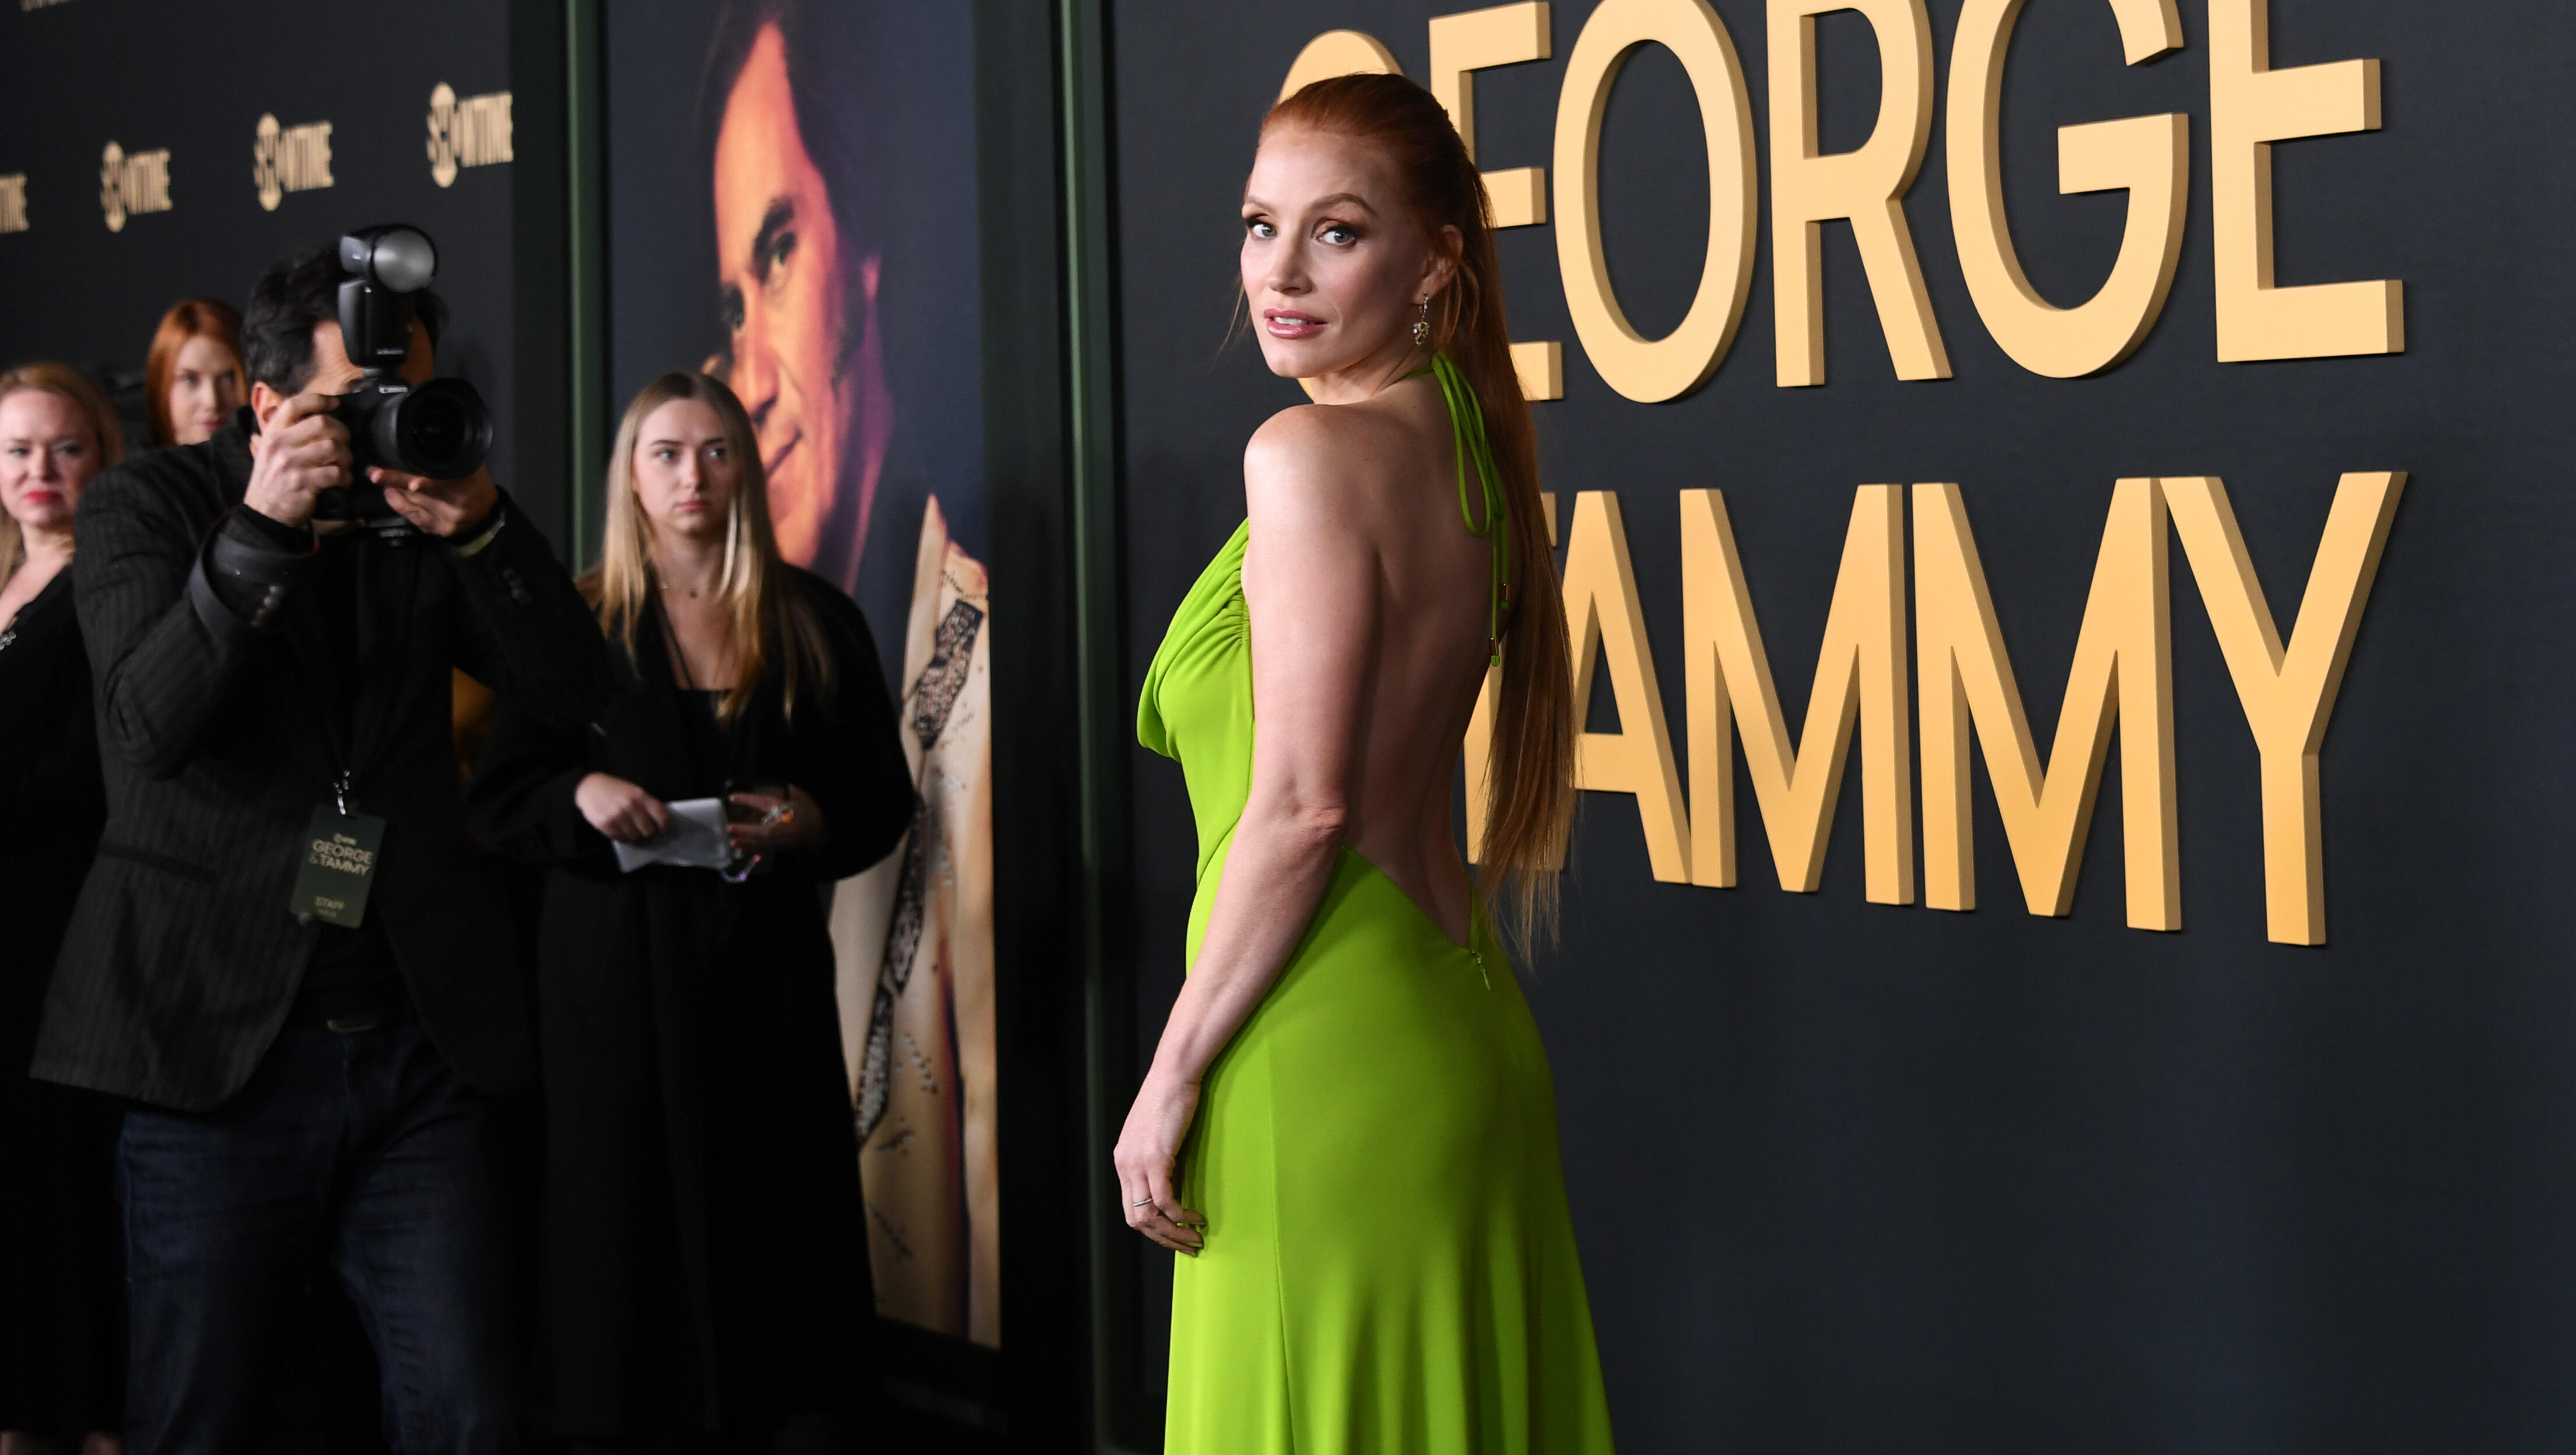 INTERVIEW: Jessica Chastain wants forgiveness